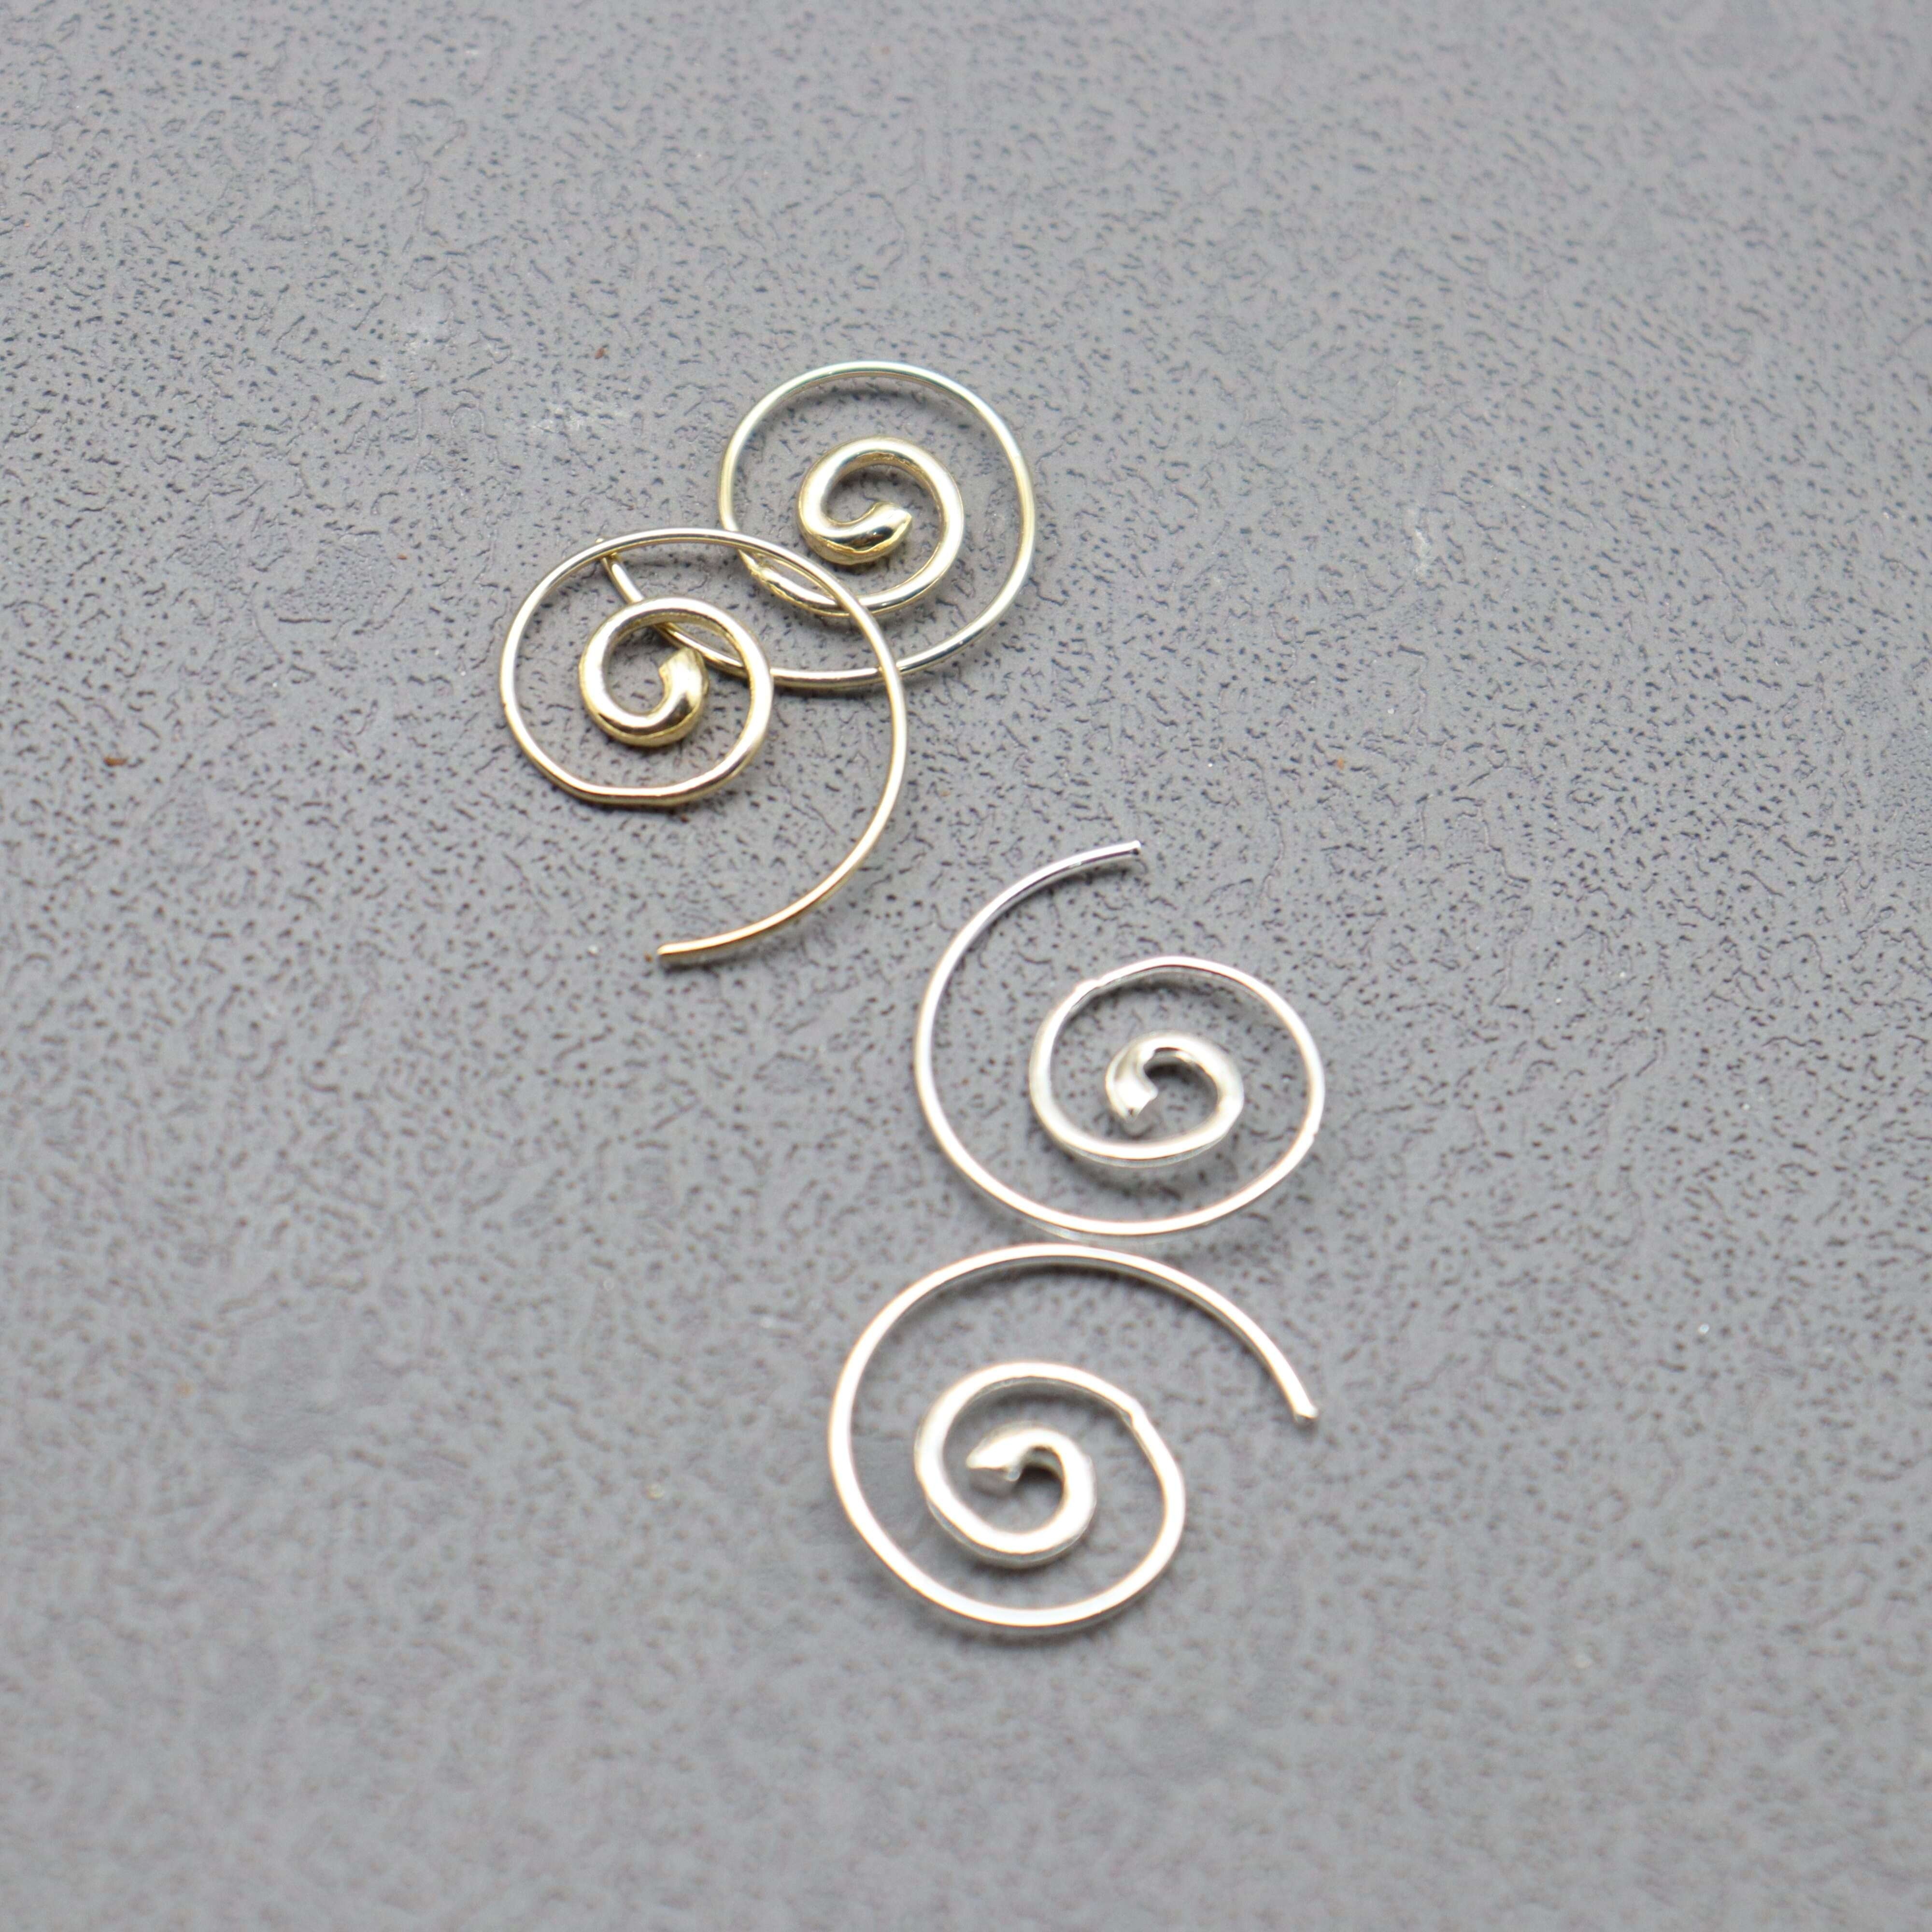 Double Helix Spiral Earrings Tutorial - Beginner Wire Wrapping